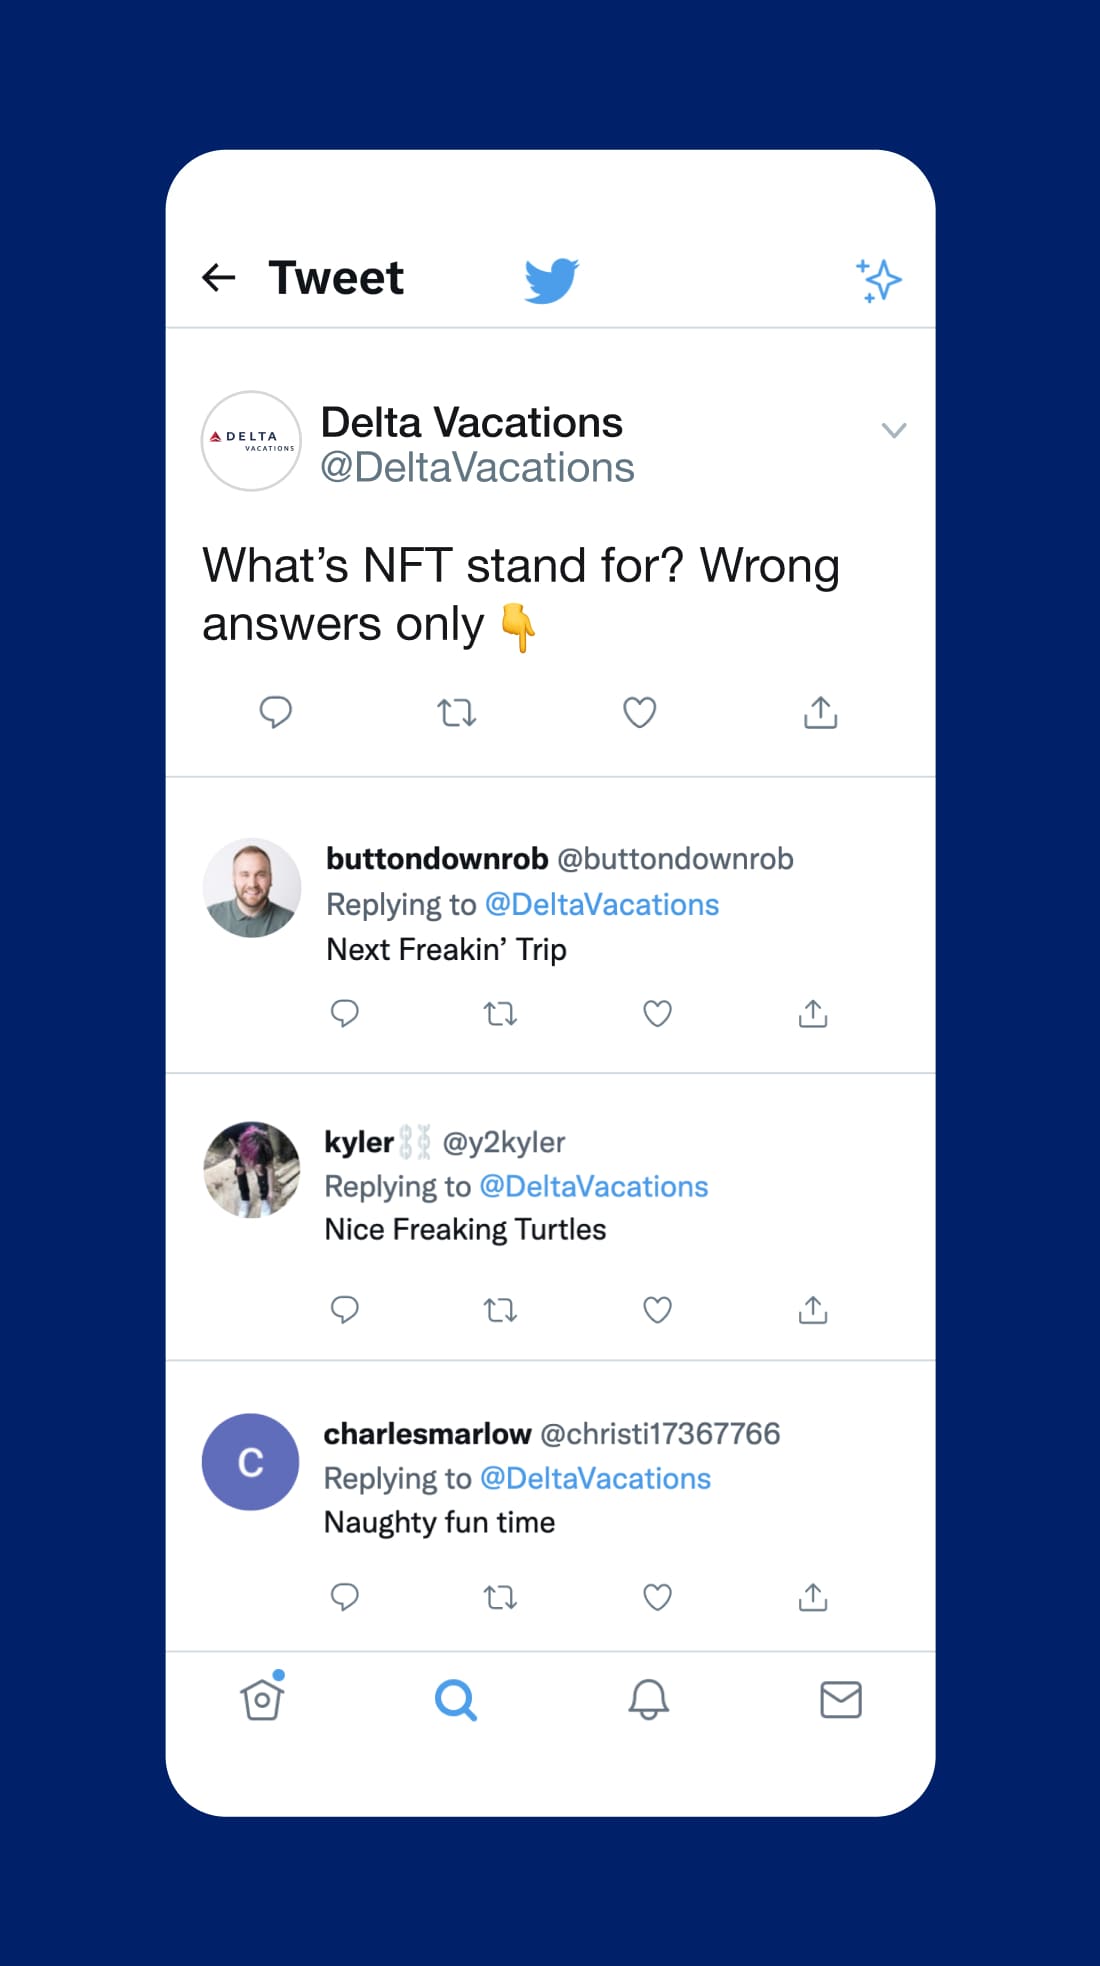 Image of Delta Vacations Tweet - "What does NFT stand for? Wrong answer only."